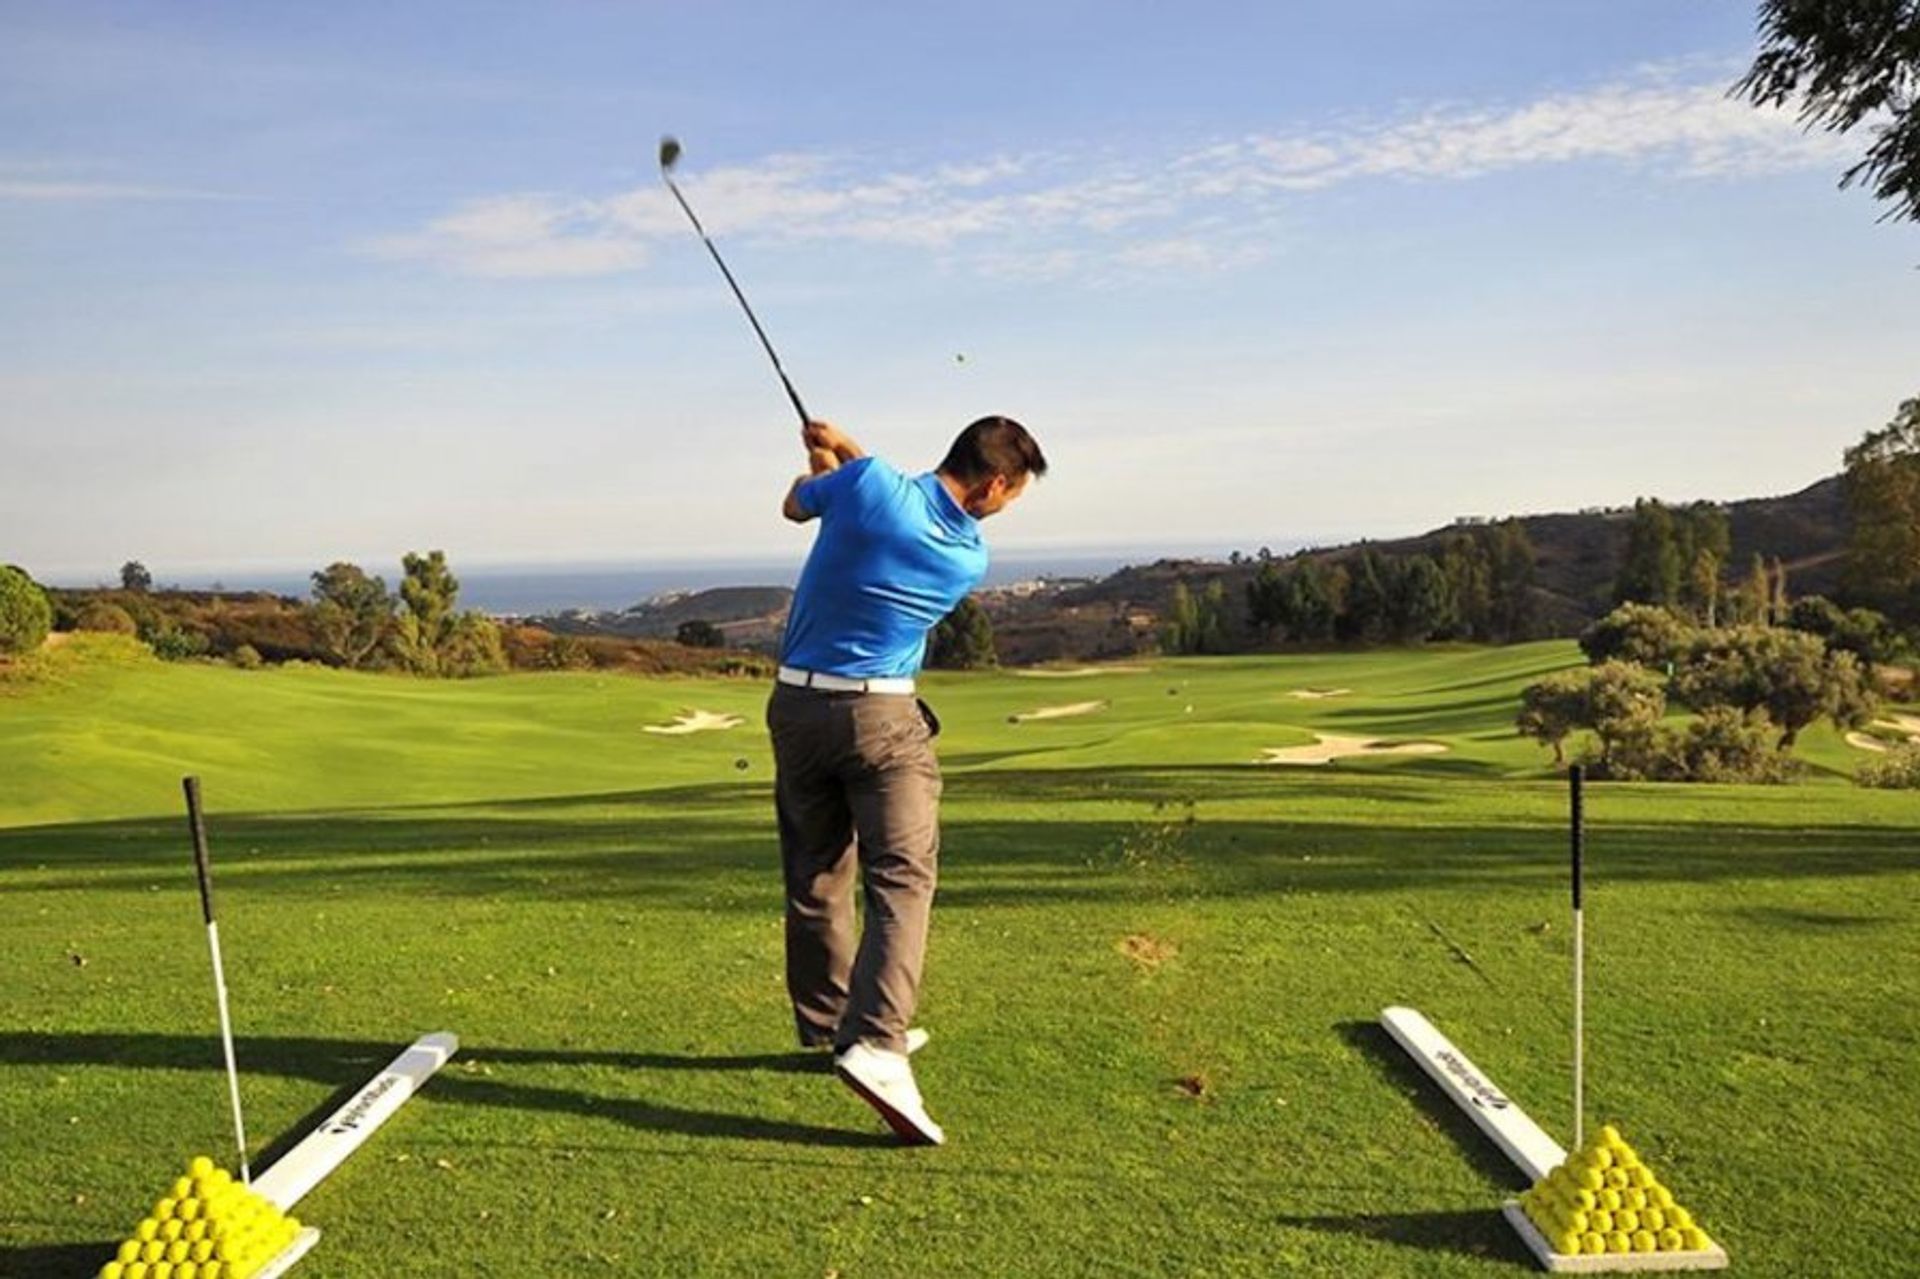 The resort's golf academy is the perfect place for beginners to practice